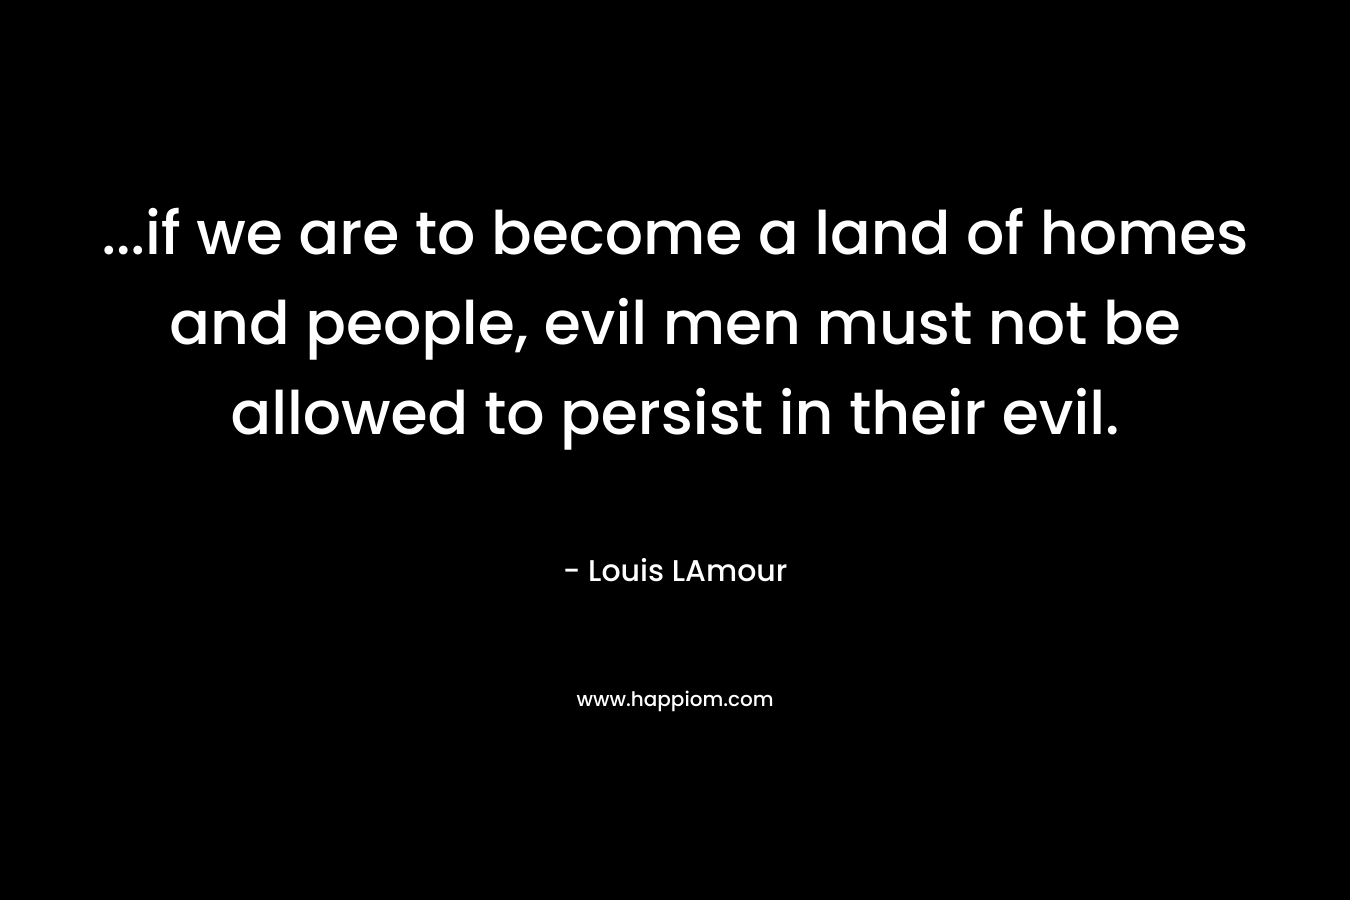 ...if we are to become a land of homes and people, evil men must not be allowed to persist in their evil.